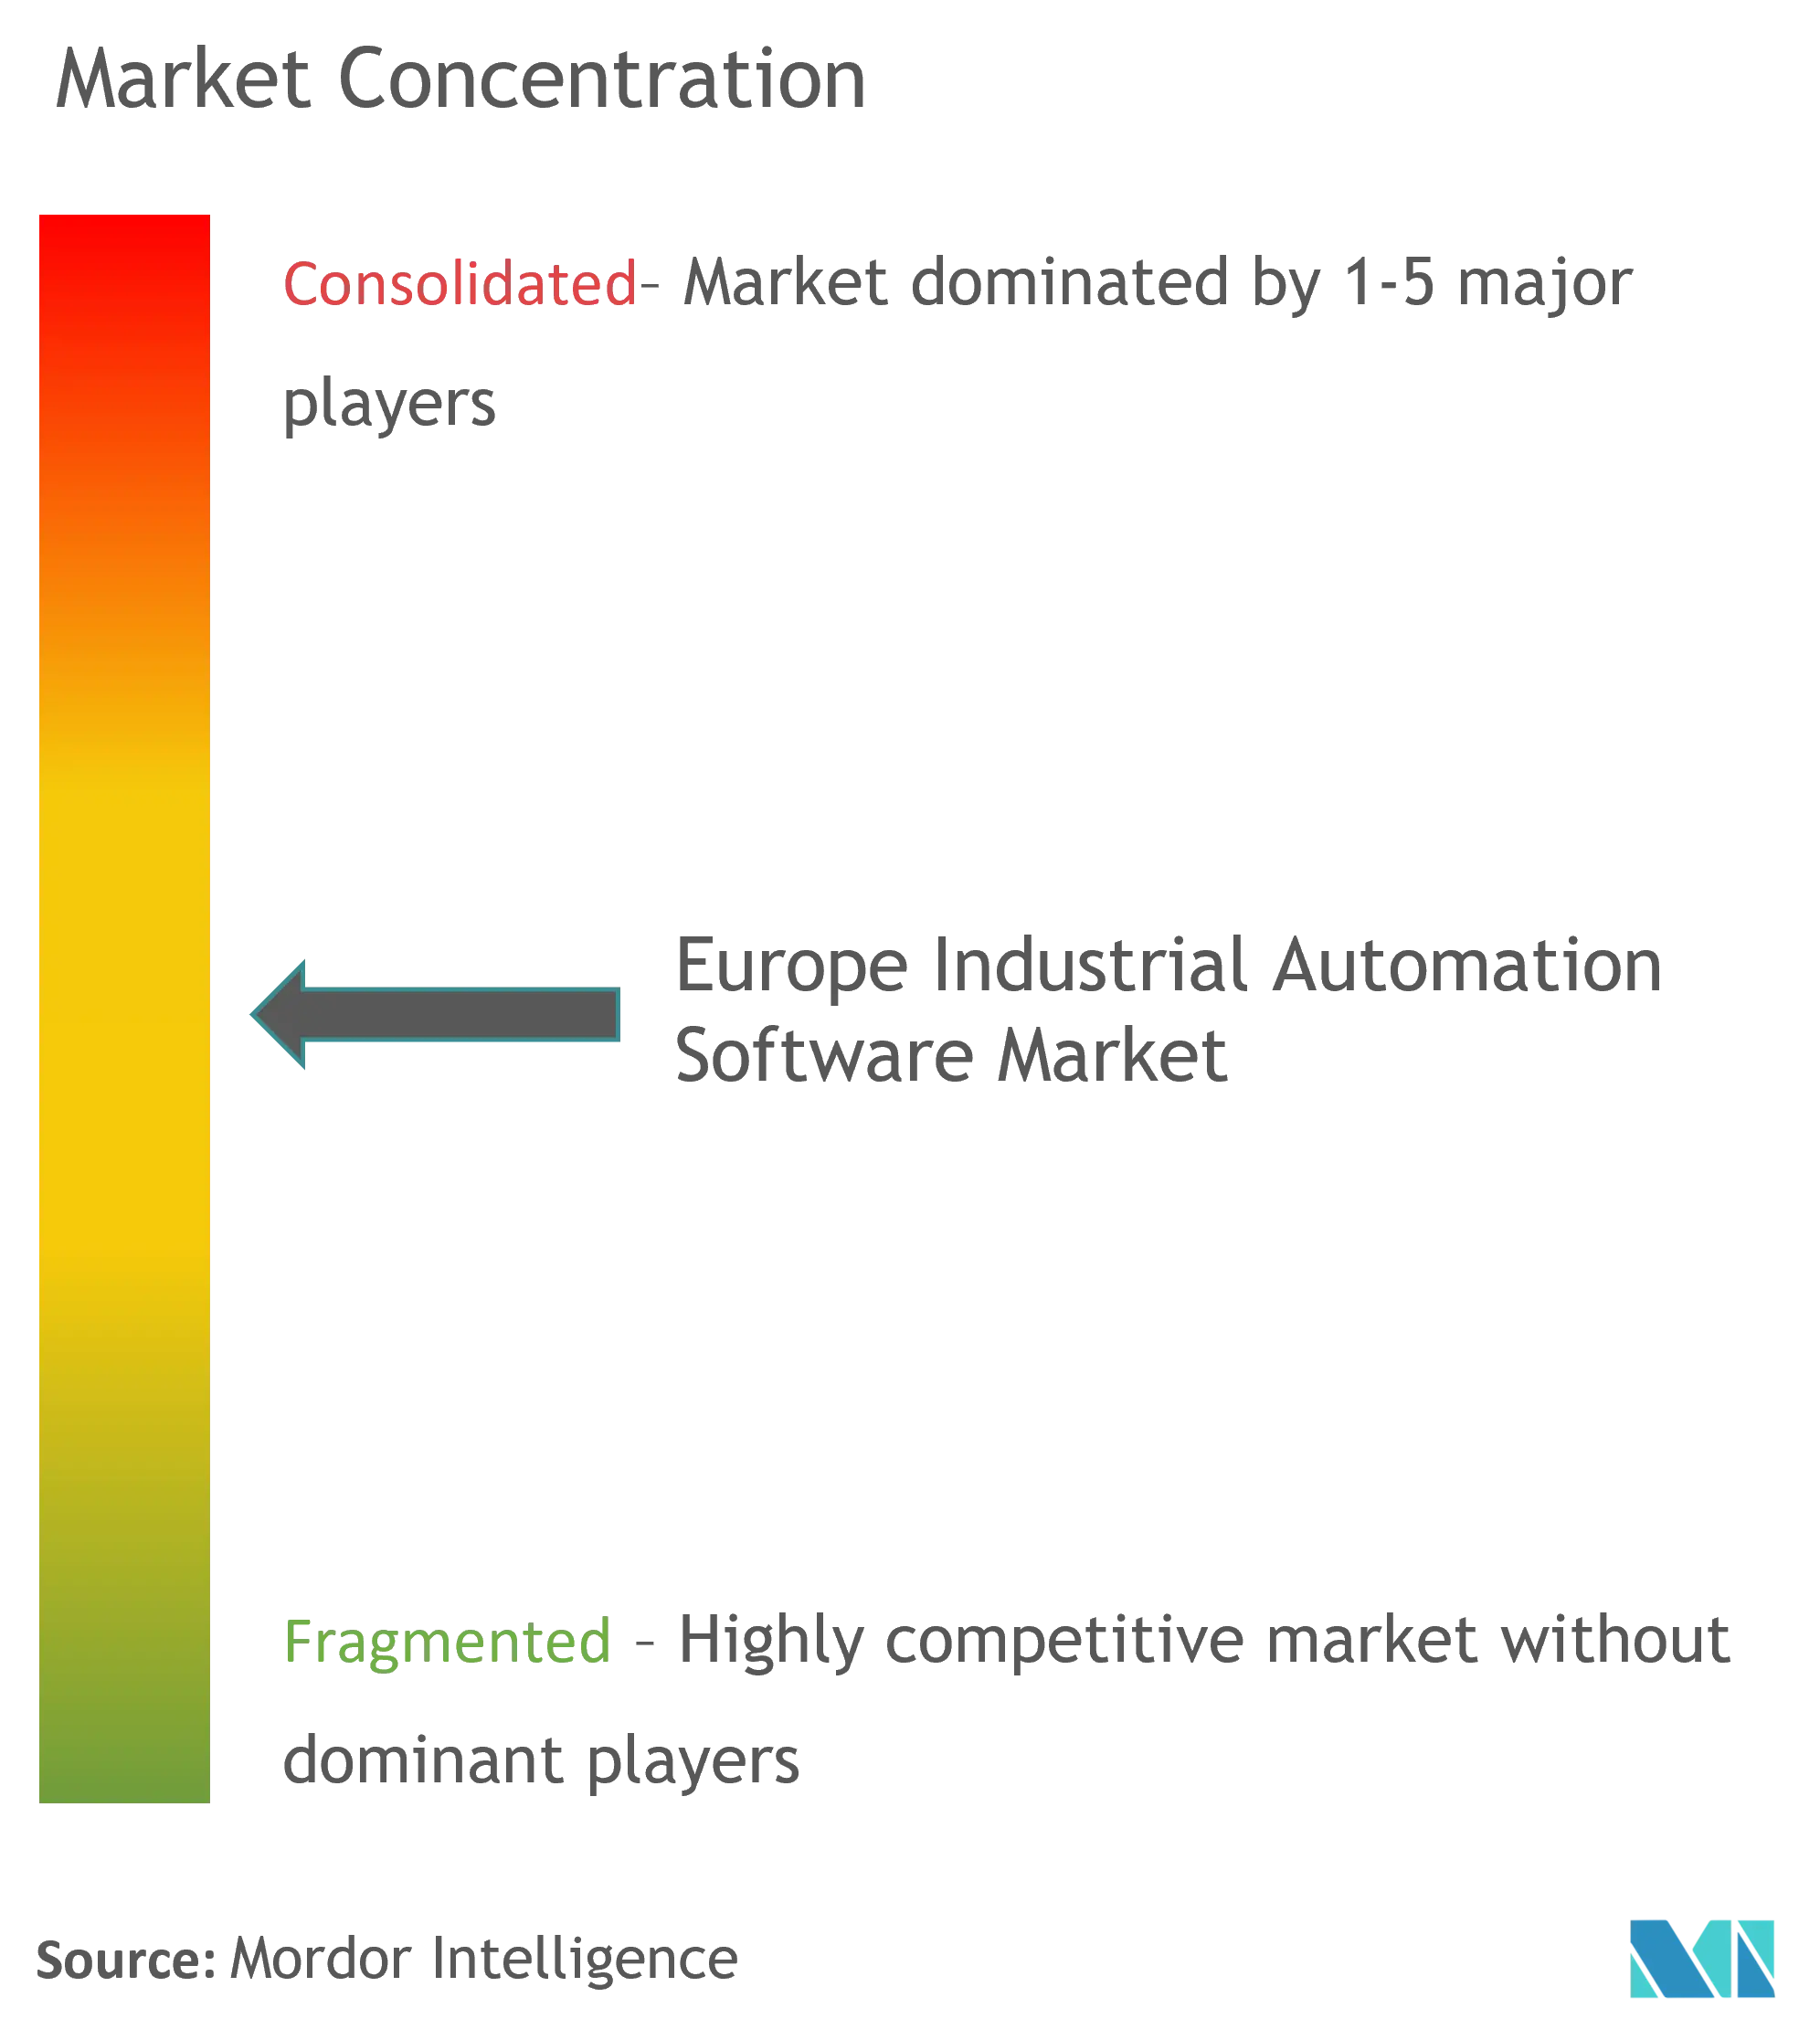 Europe Industrial Automation Software Market - Market Conentration.png